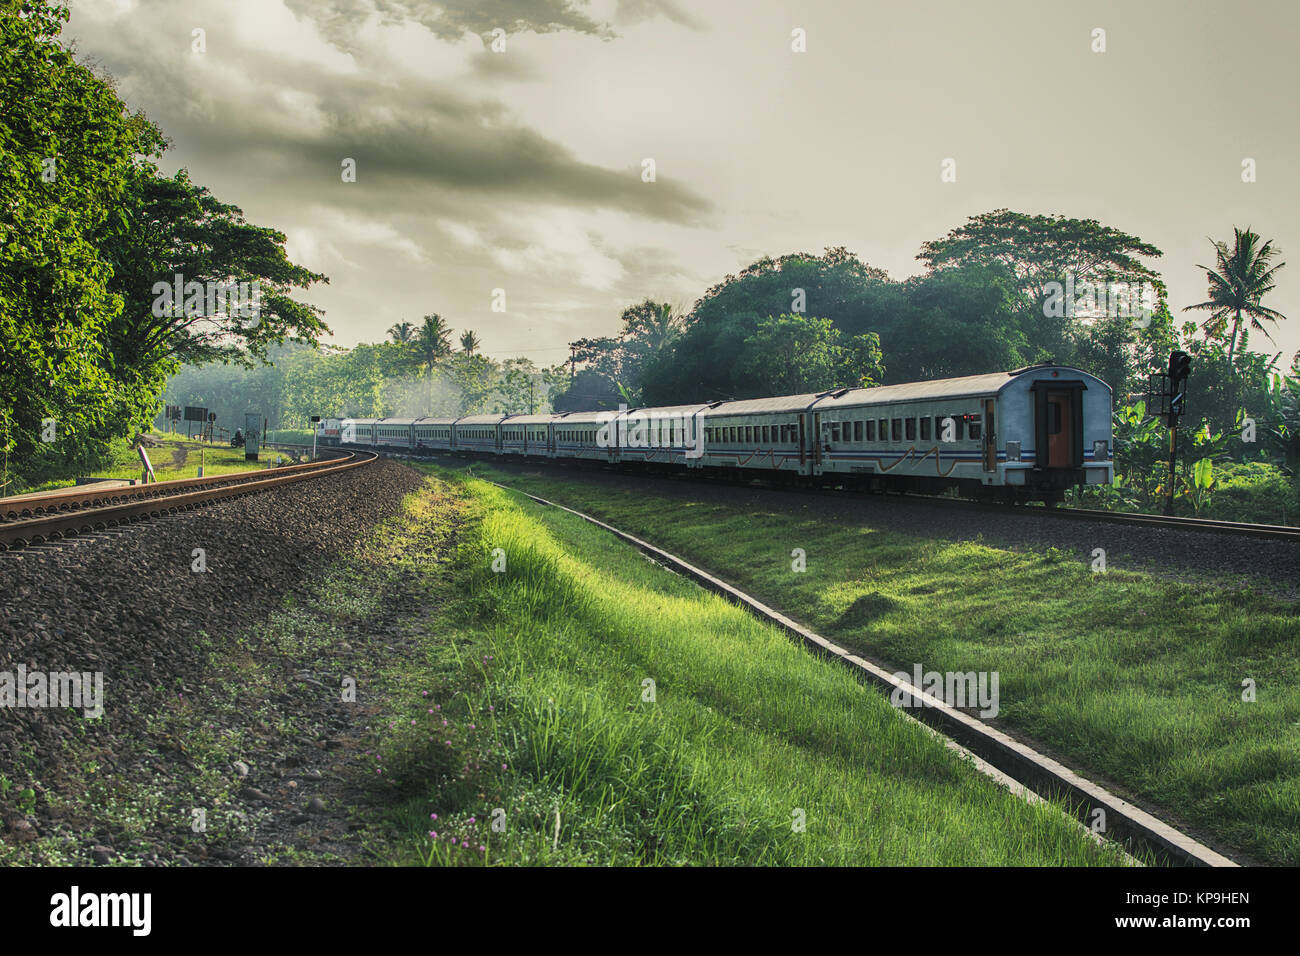 1,799 Posing Railway Track Images, Stock Photos, 3D objects, & Vectors |  Shutterstock